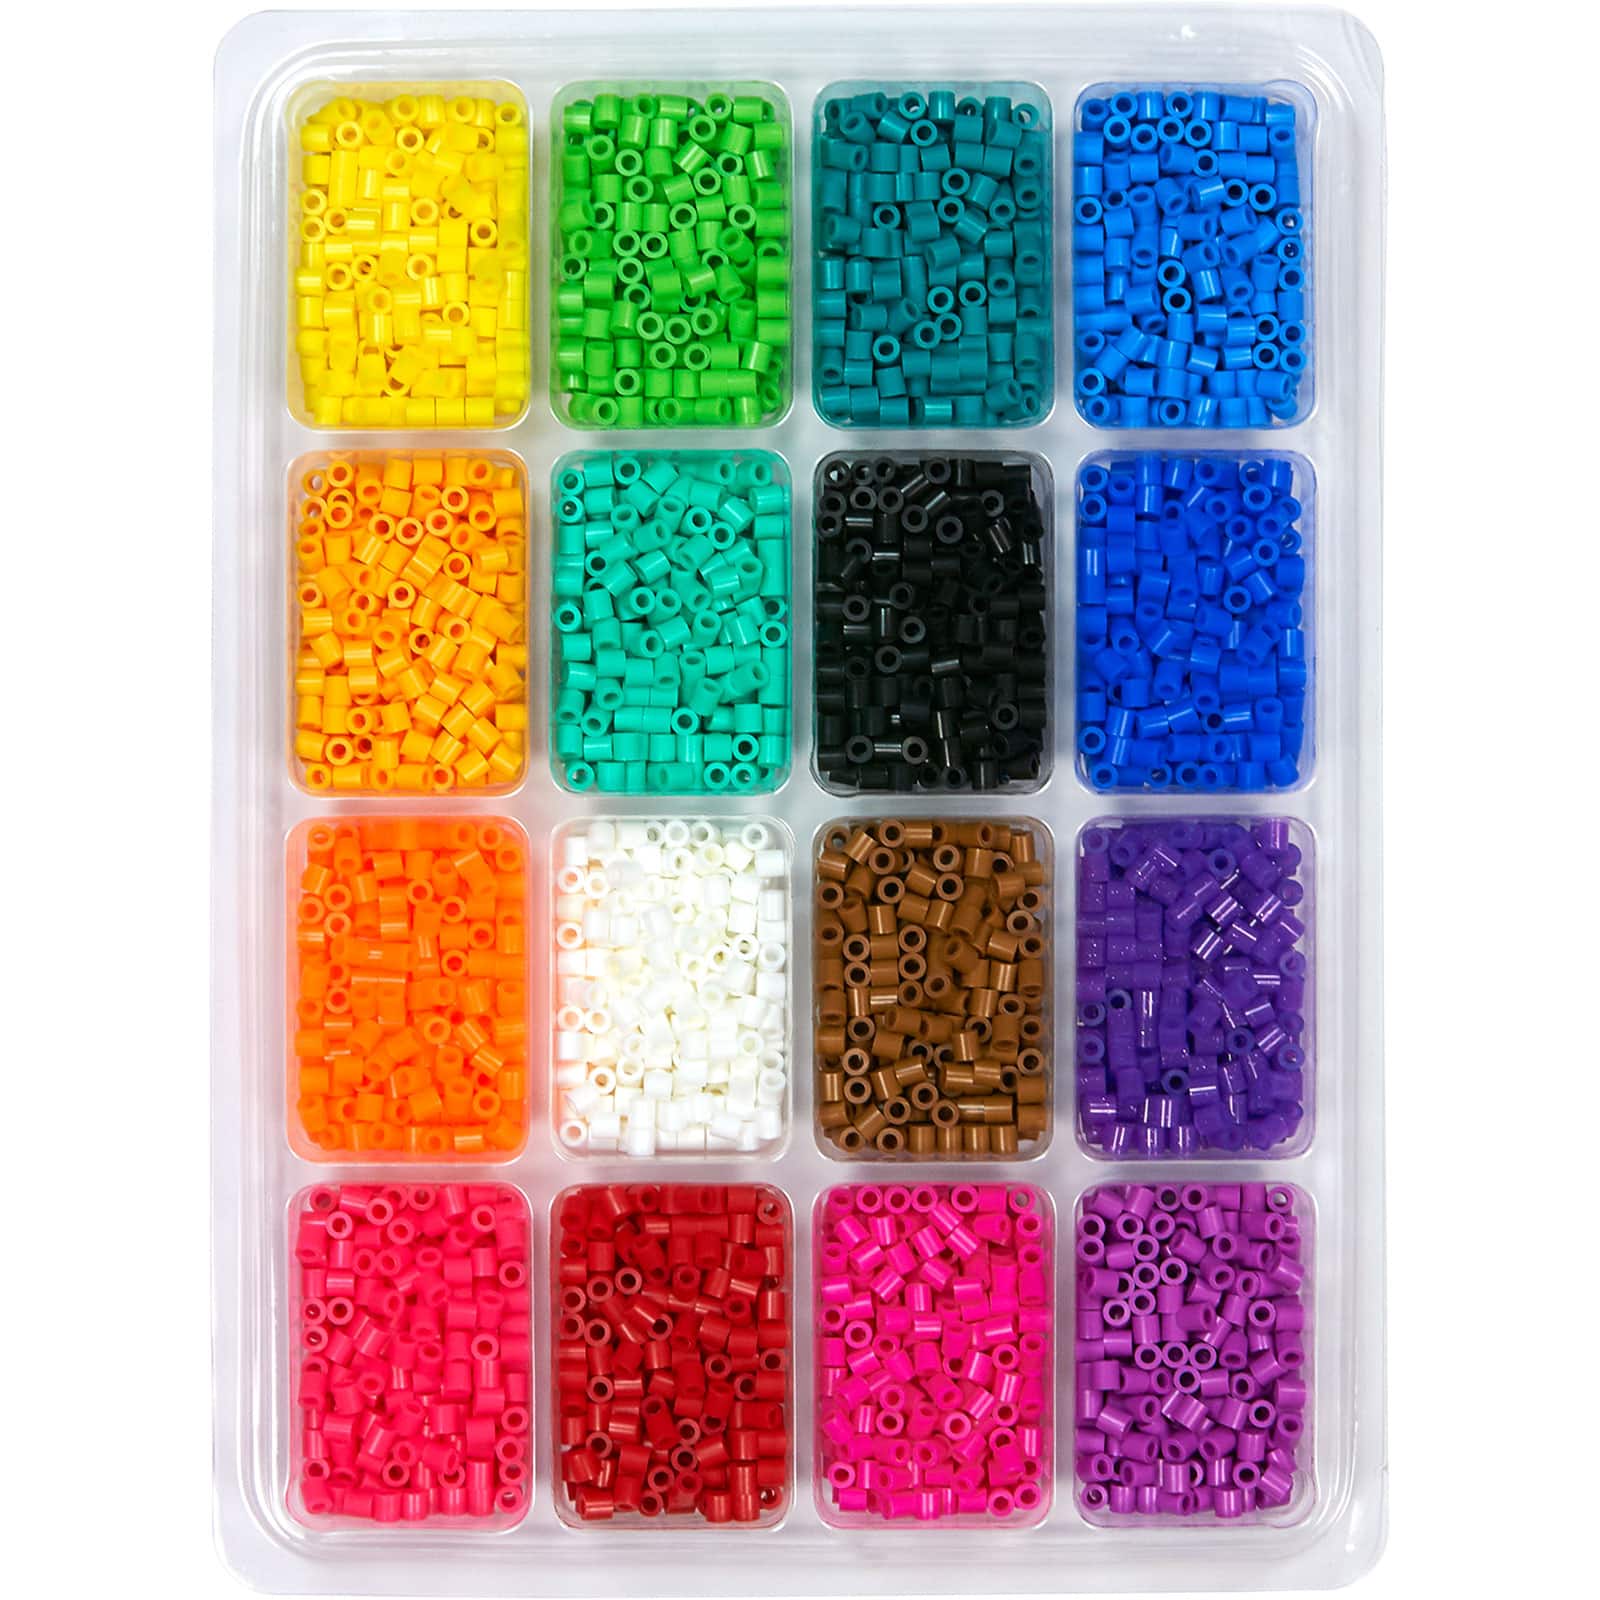 Safely Designed Wholesale Perler Beads For Fun And Learning